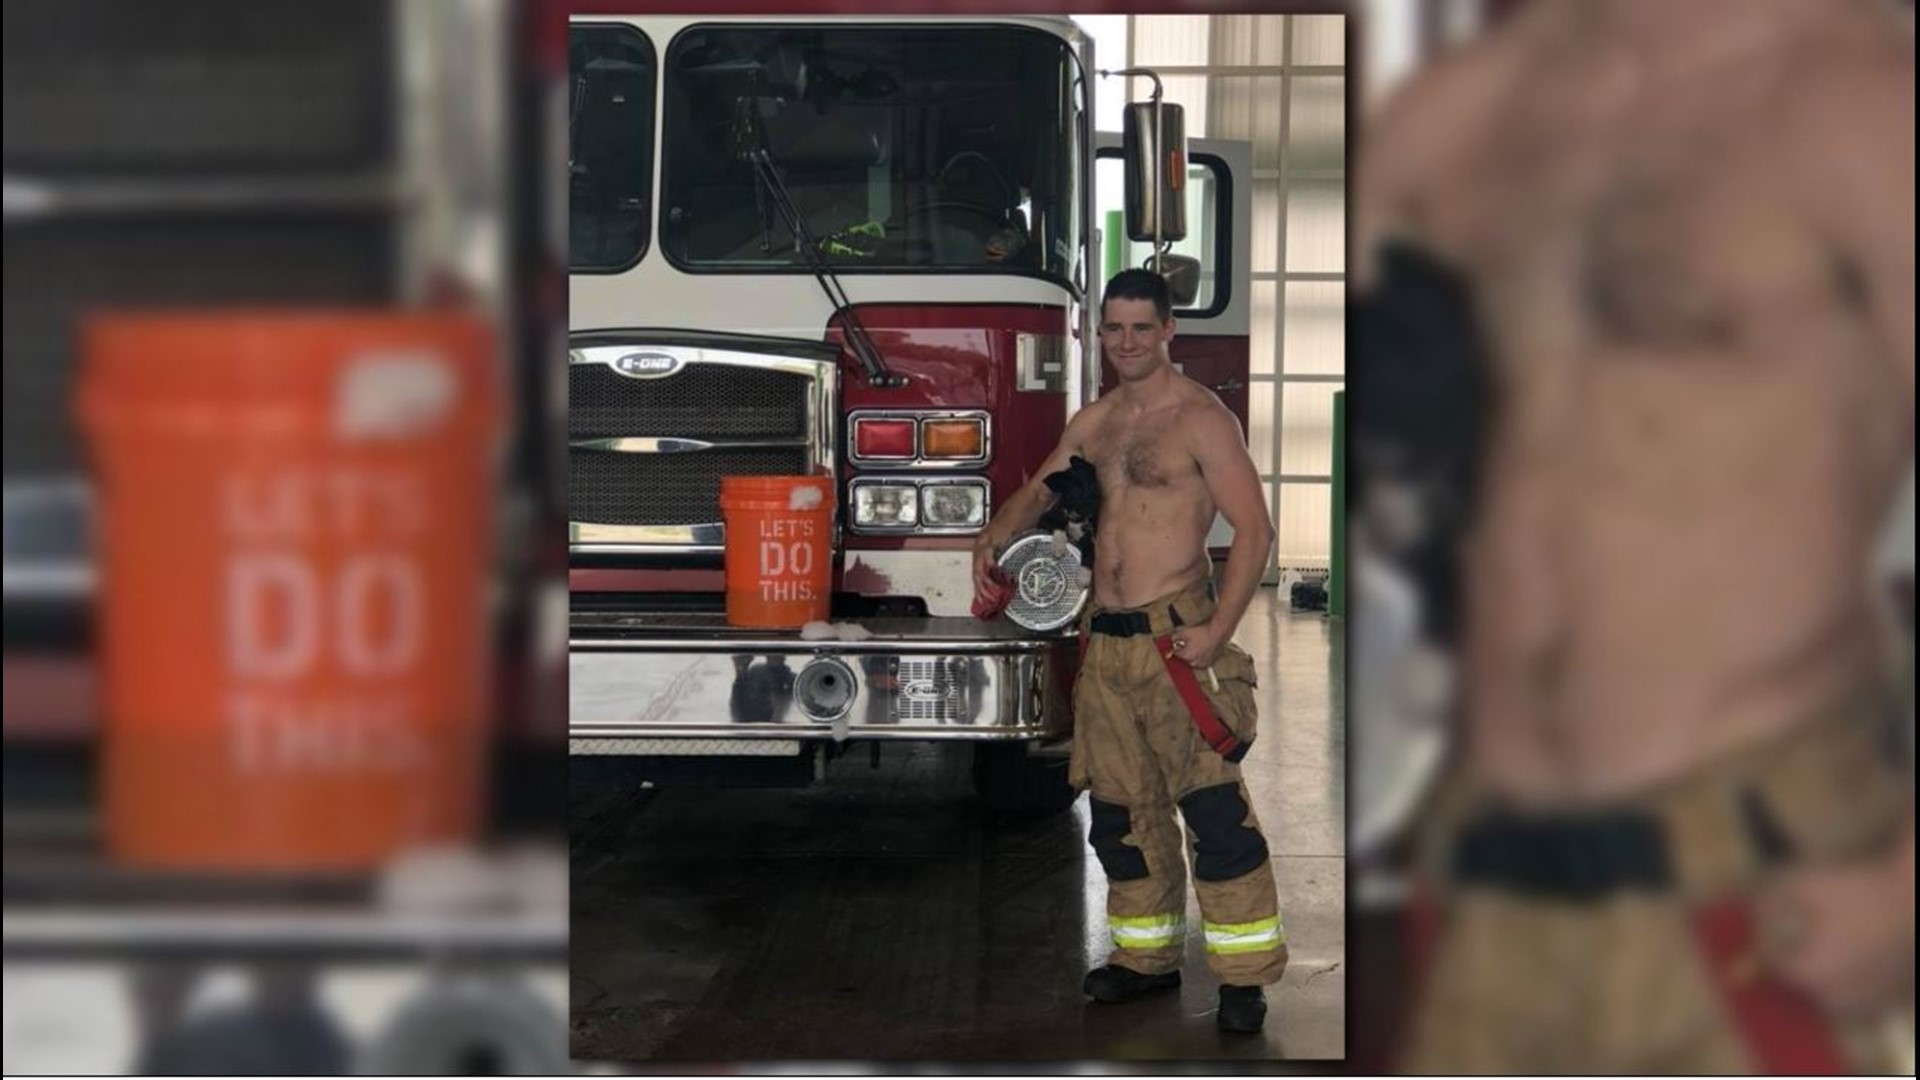 Galveston firefighters pose with adoptable pups for 2019 calendar